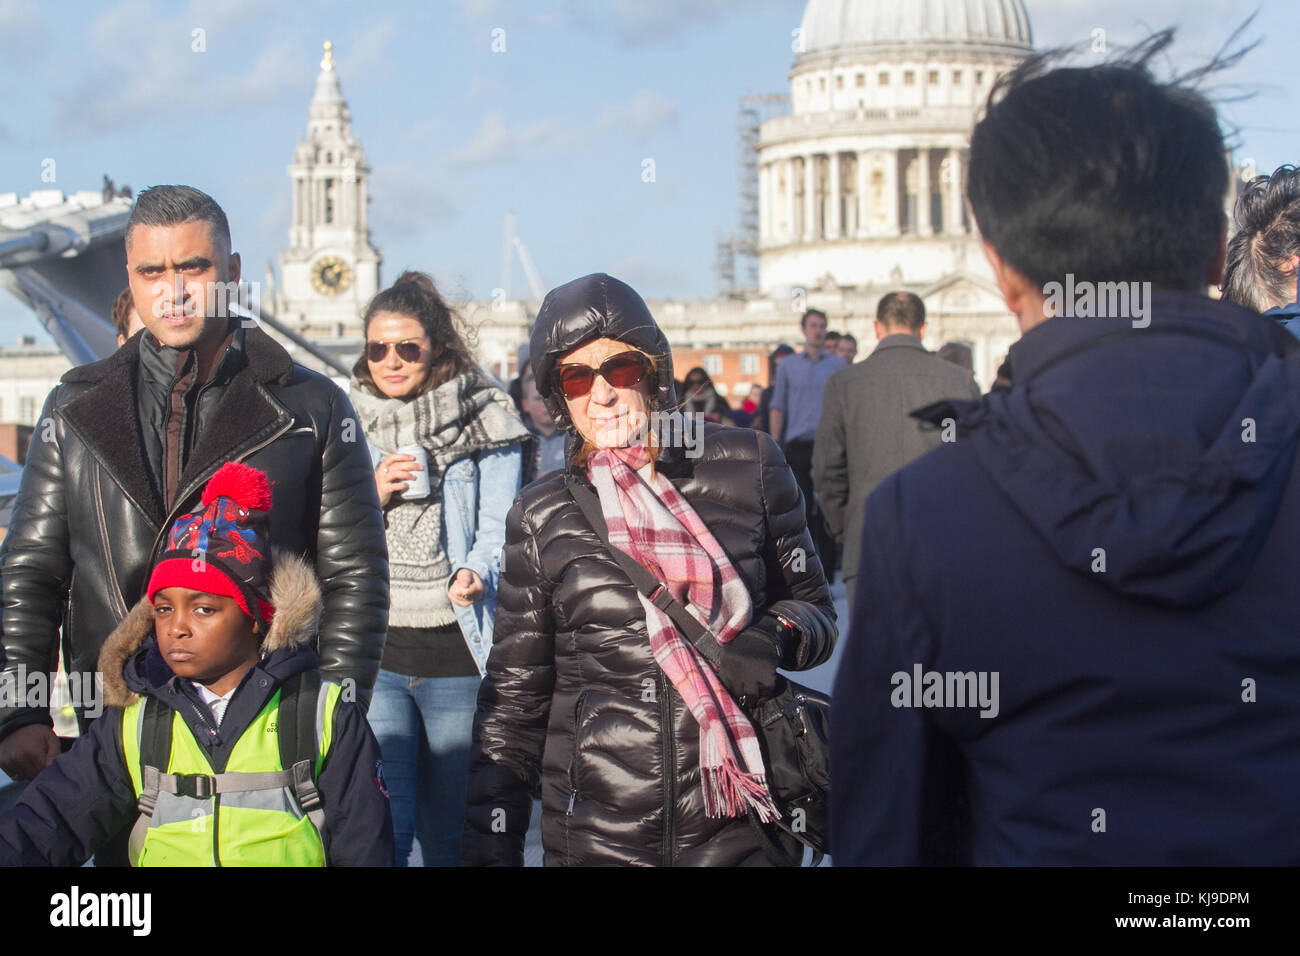 London, UK. 23rd Nov, 2017. People struggle with the blustery cold weather conditions walking on Millenium Bridge London with winds likely to gust up to 60mph in some places  Credit: amer ghazzal/Alamy Live News Stock Photo